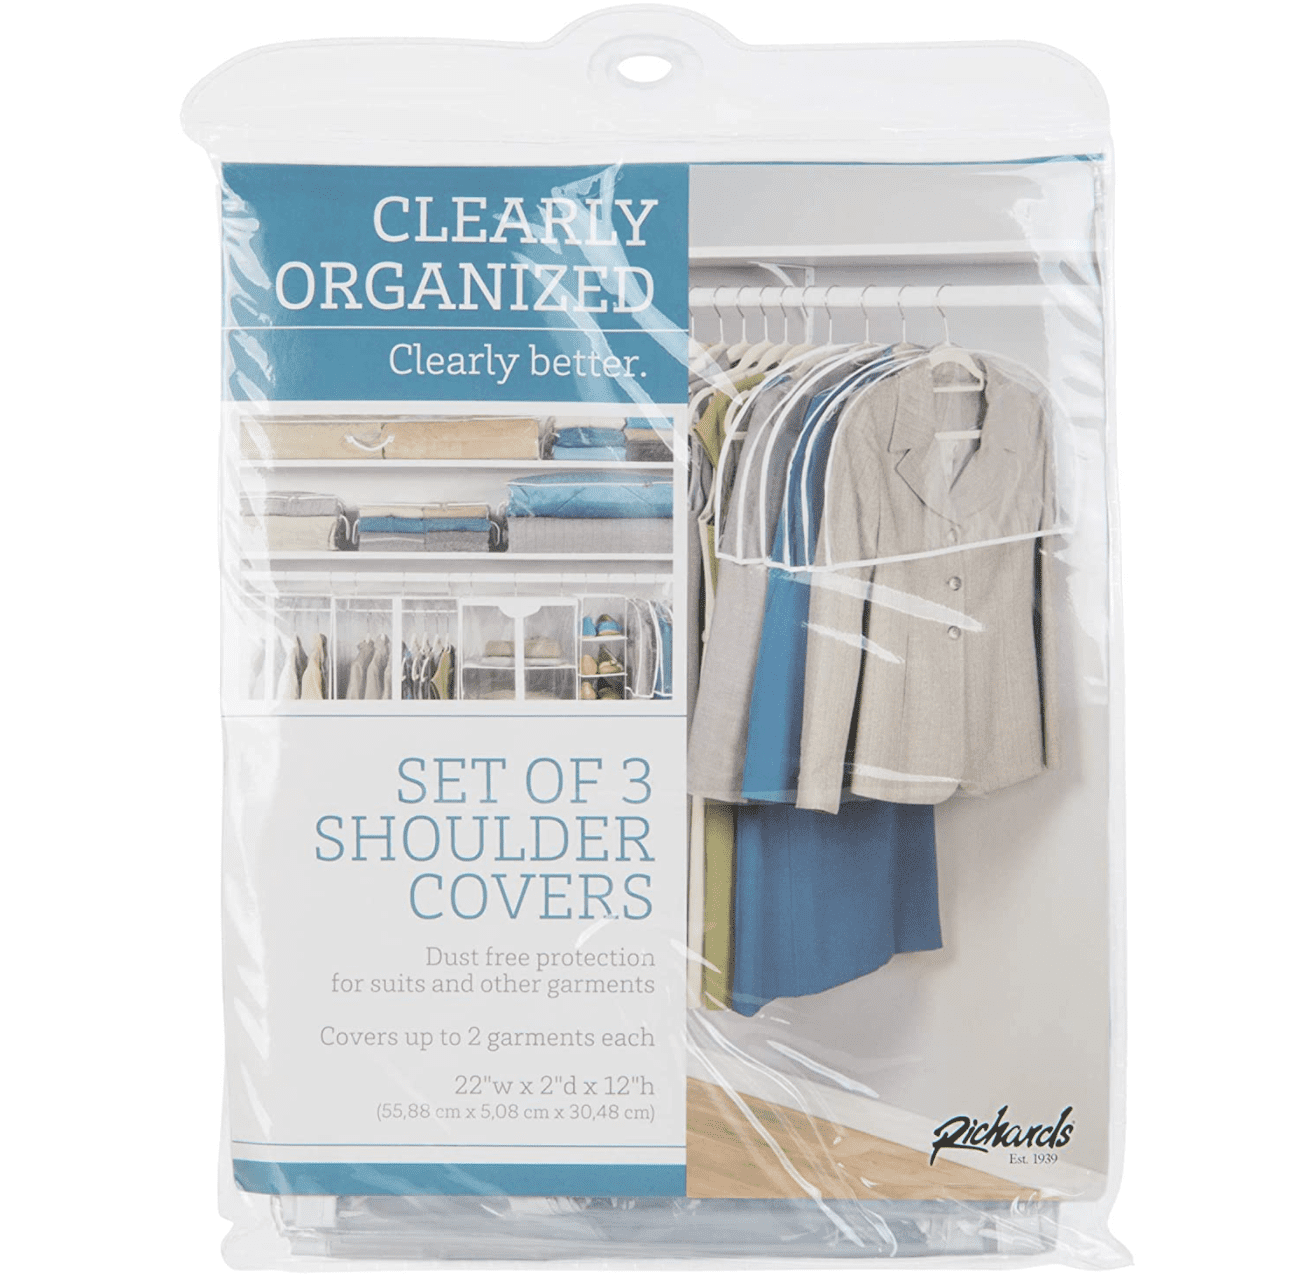 Richards Homewares Clearly Organized Clear Vinyl Storage Closet Garment Cover, 